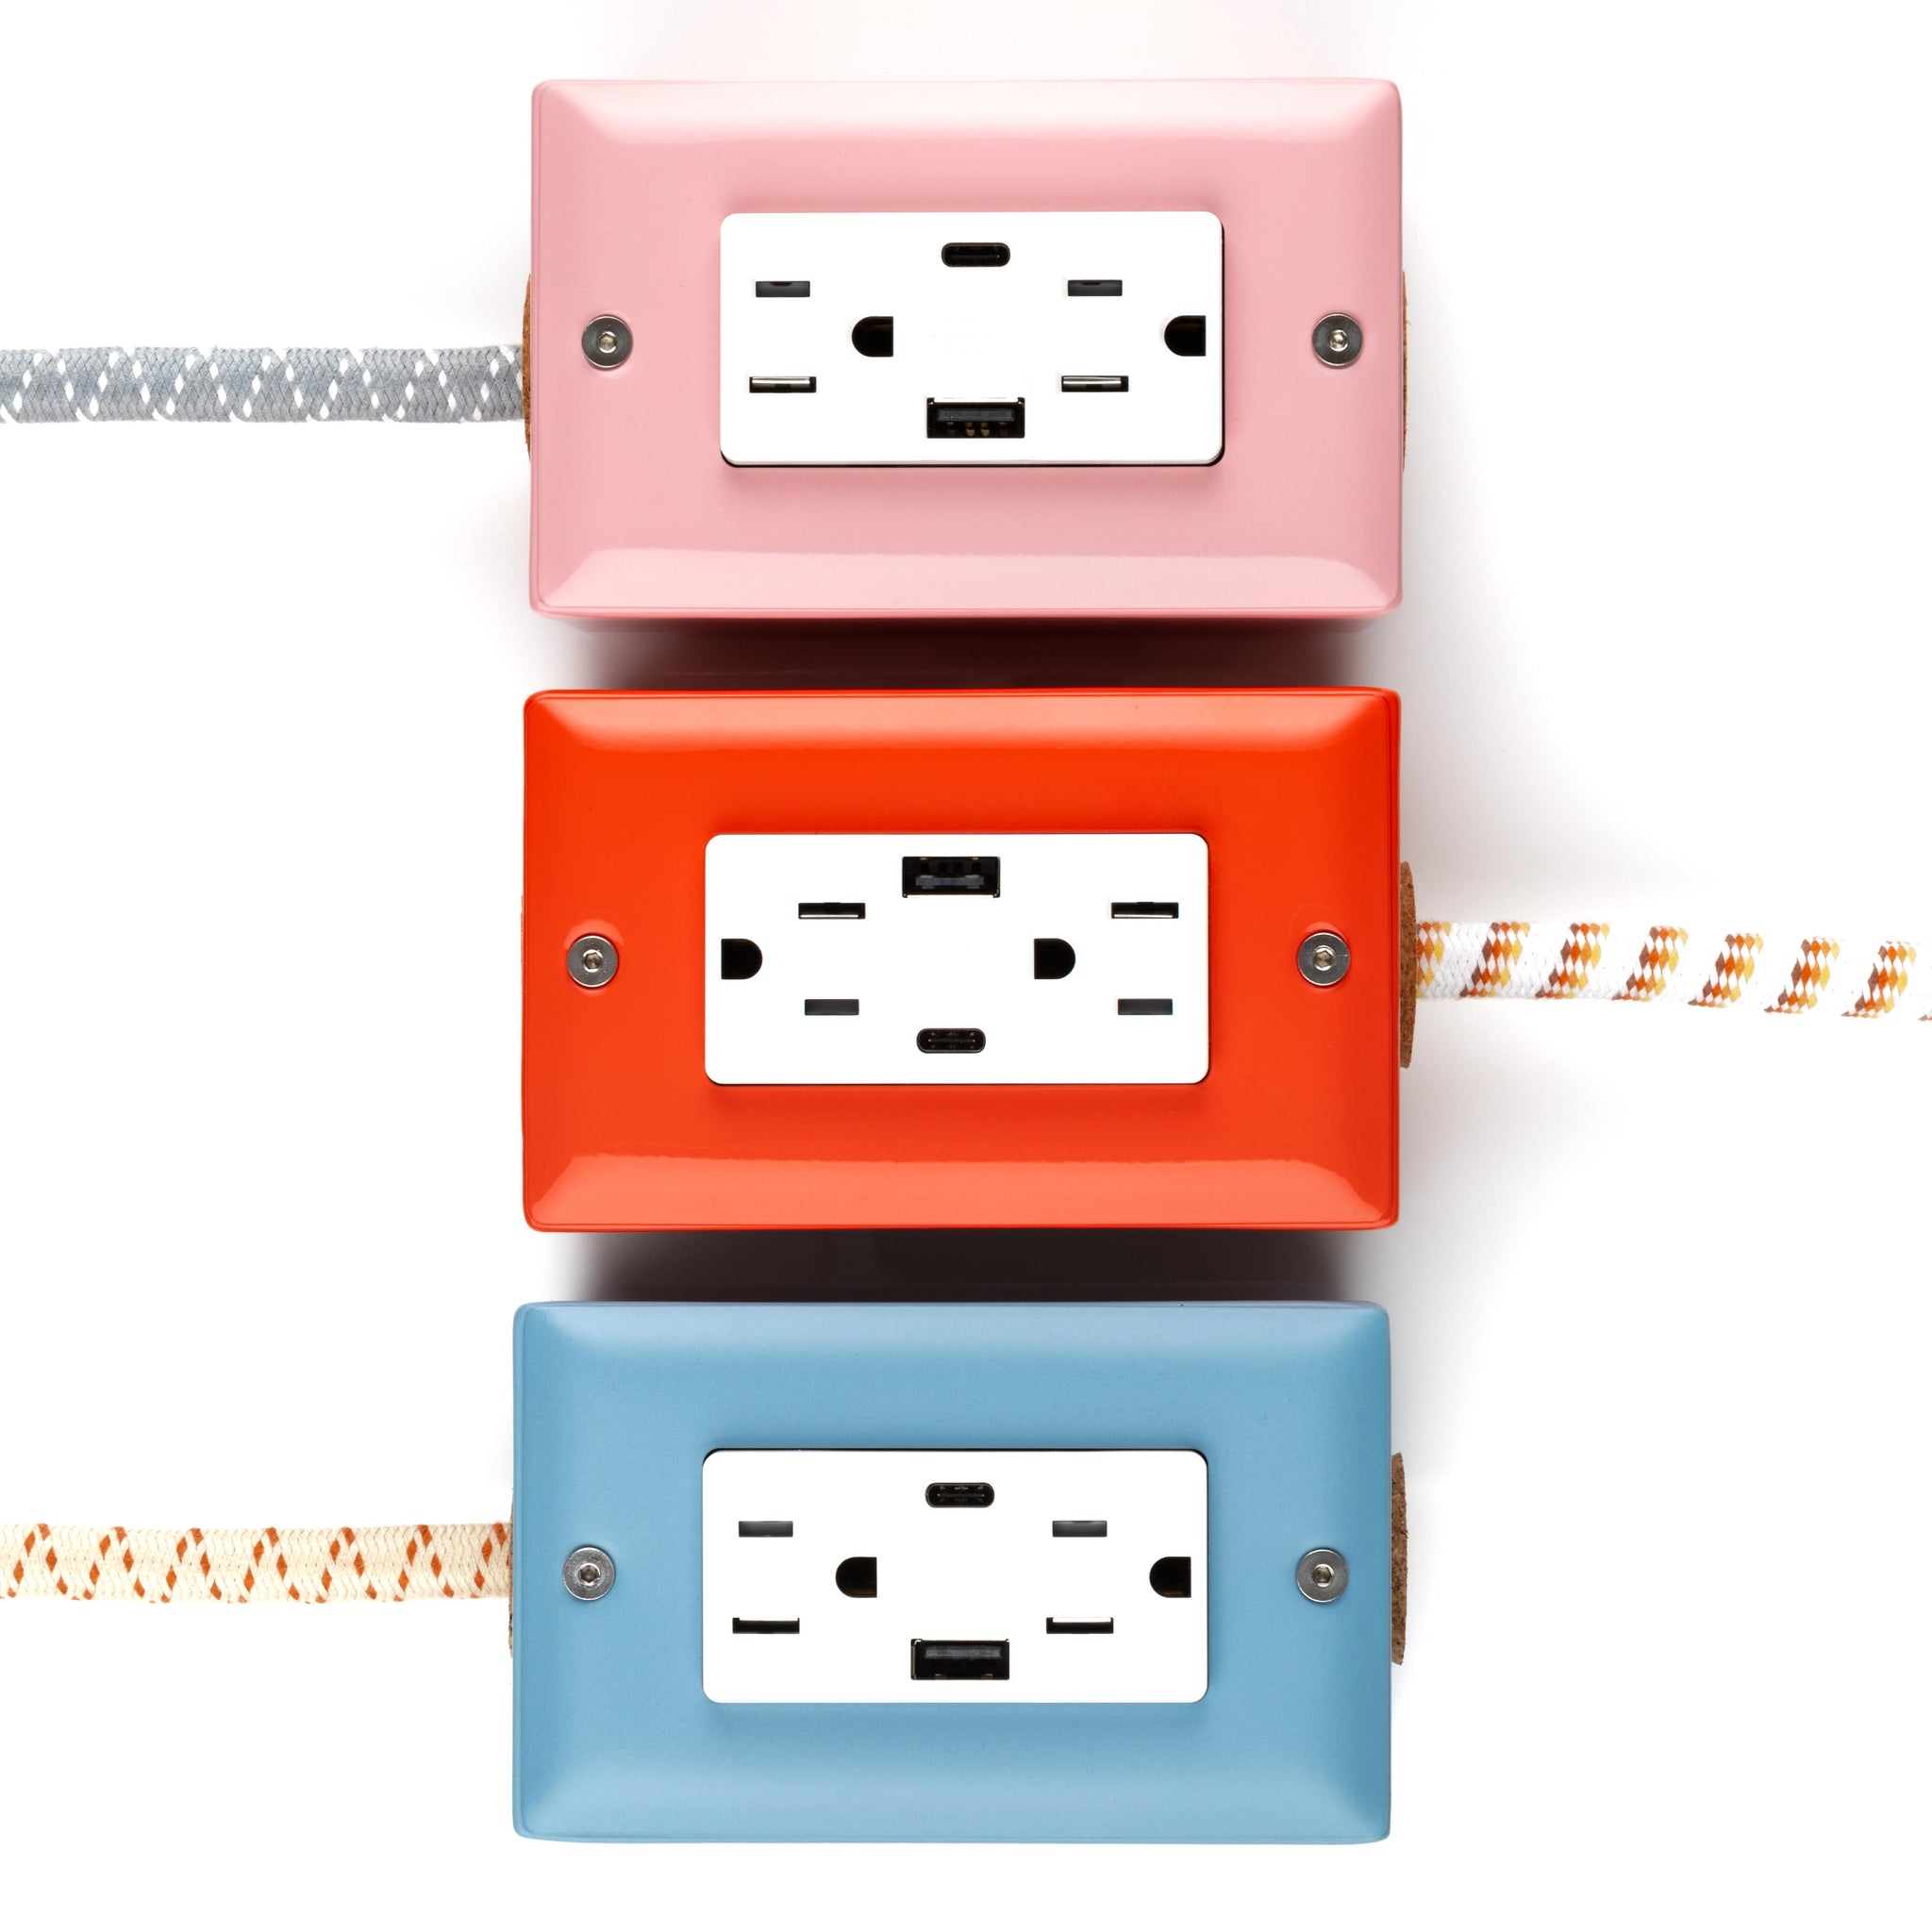 New! The First Smart Chip USB Type C® Extension Cord - 8ft Extō USBC Dual-Outlet Power Cord Candy Pink